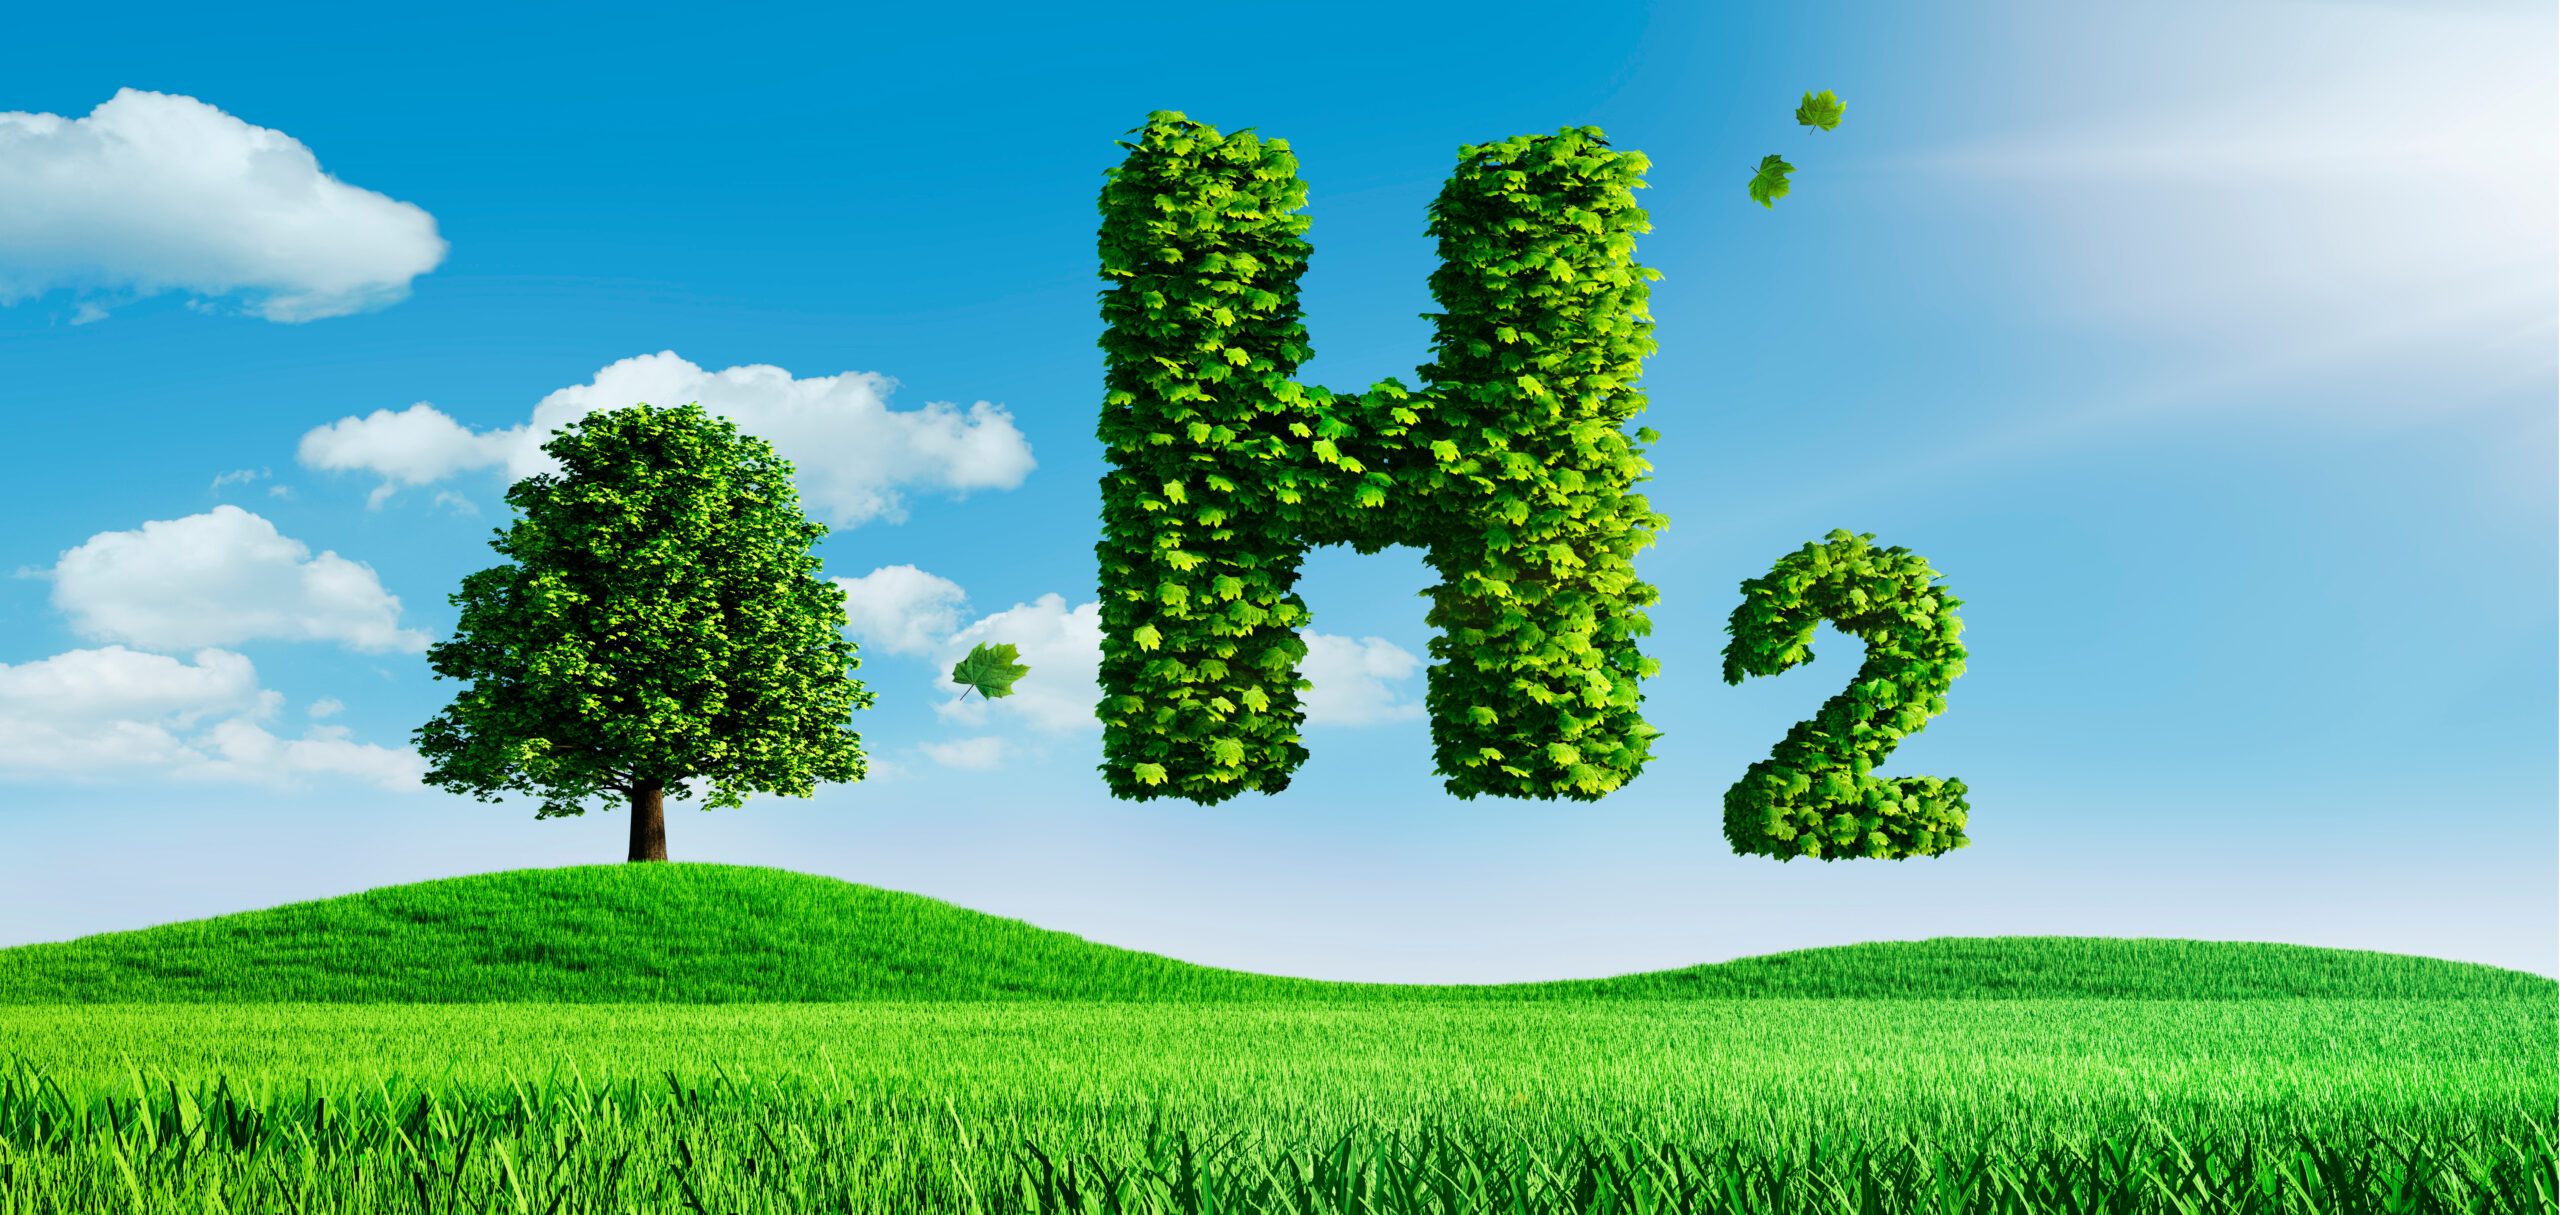 Image of a green field under a blue sky with a huge "H2" made from leaves